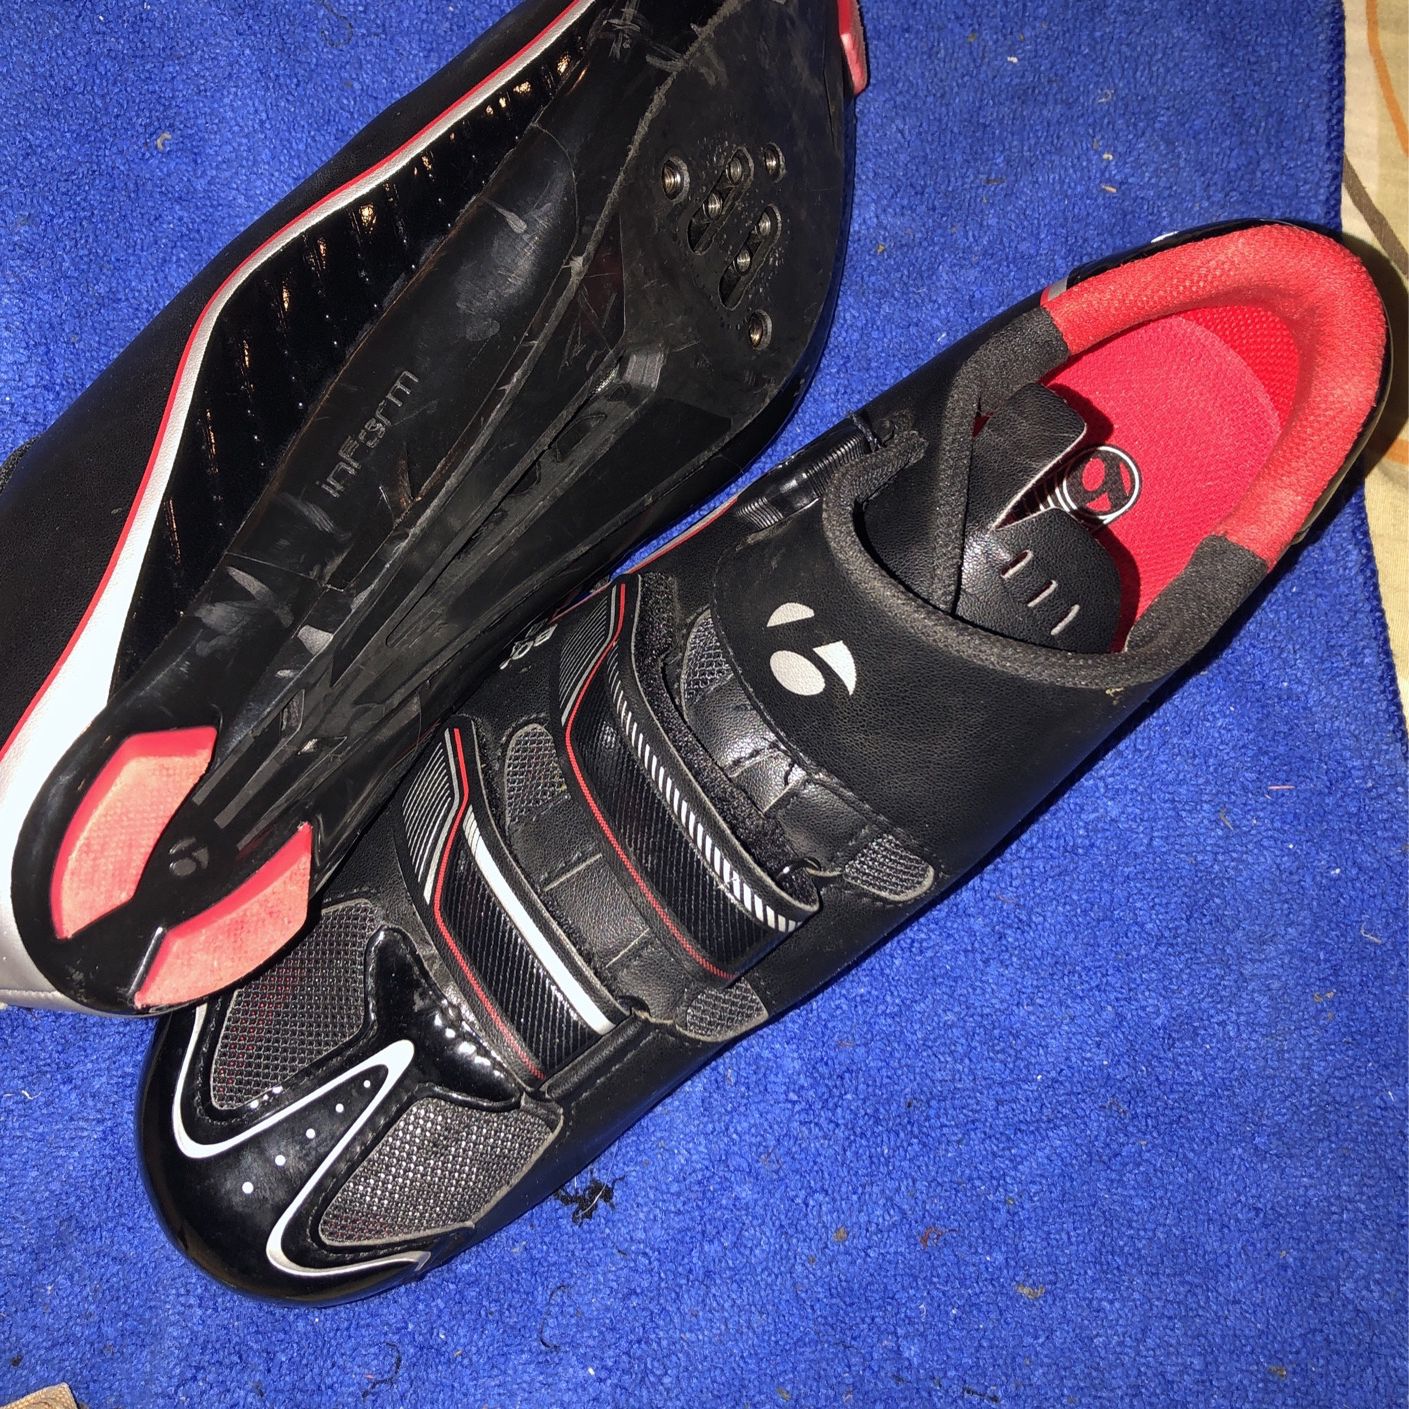 Bontrager Road Bike Shoes Size 12 Mens Must Sell